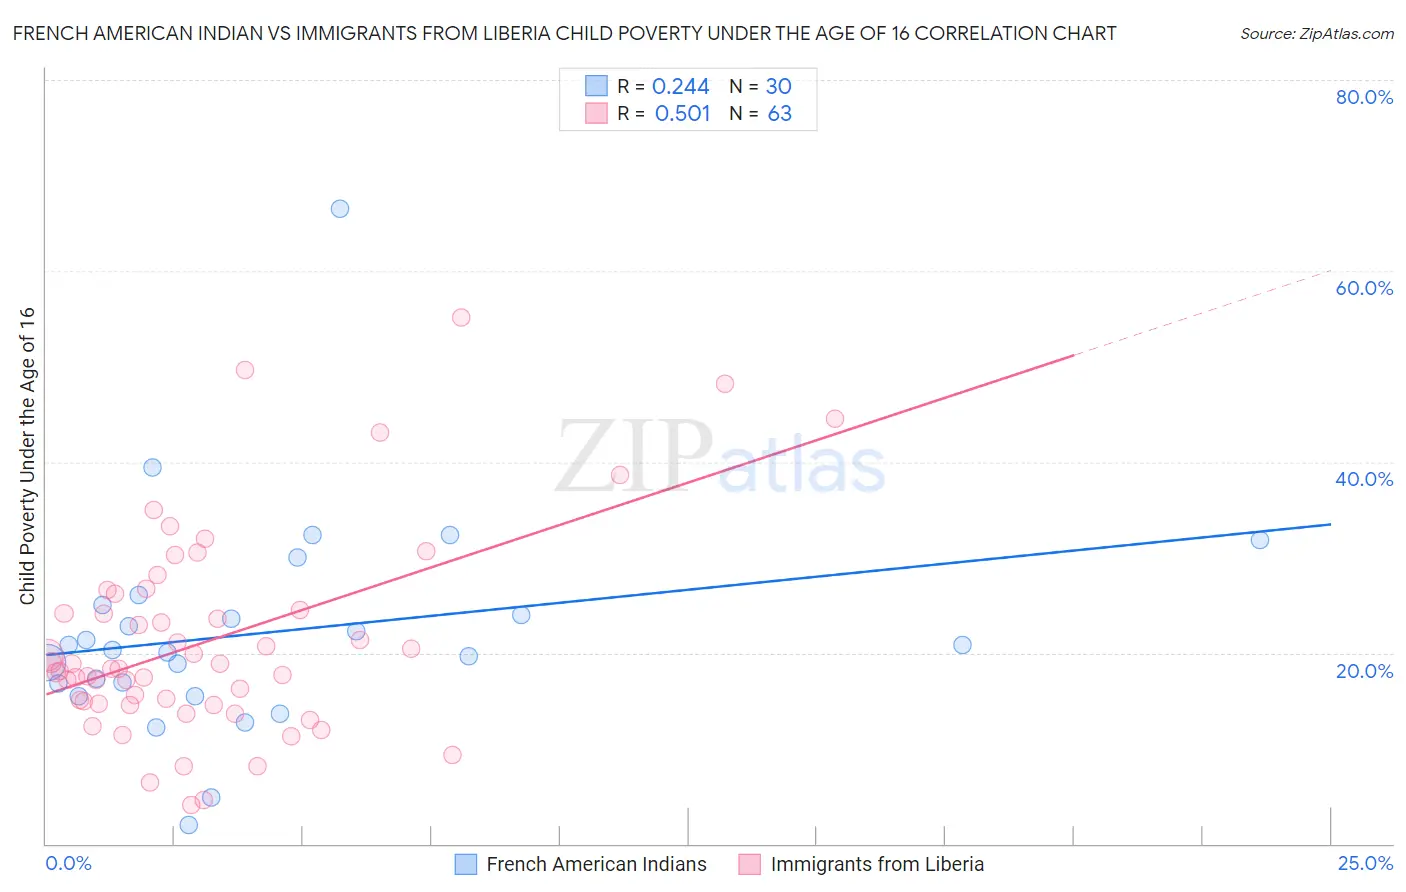 French American Indian vs Immigrants from Liberia Child Poverty Under the Age of 16